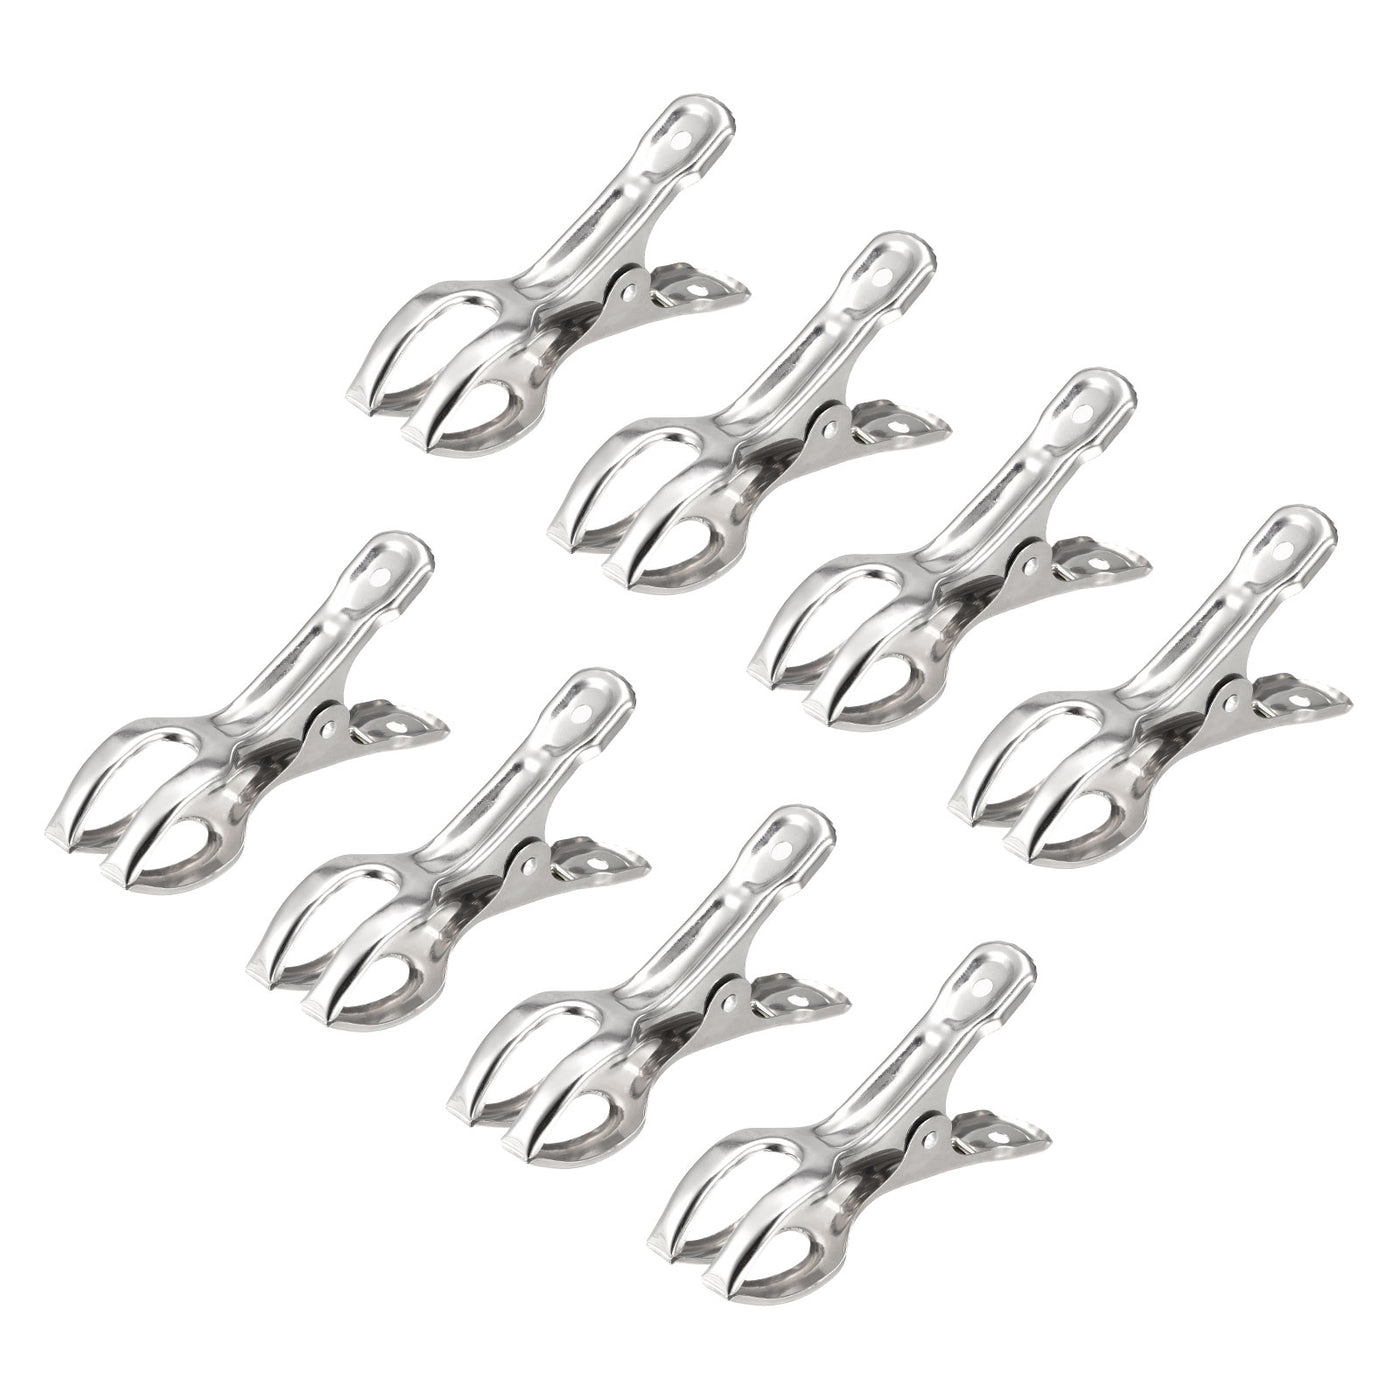 uxcell Uxcell Tablecloth Clips - 87mm Stainless Steel Clamps for Fixing Table Cloth Hanging Clothes, 24 Pcs